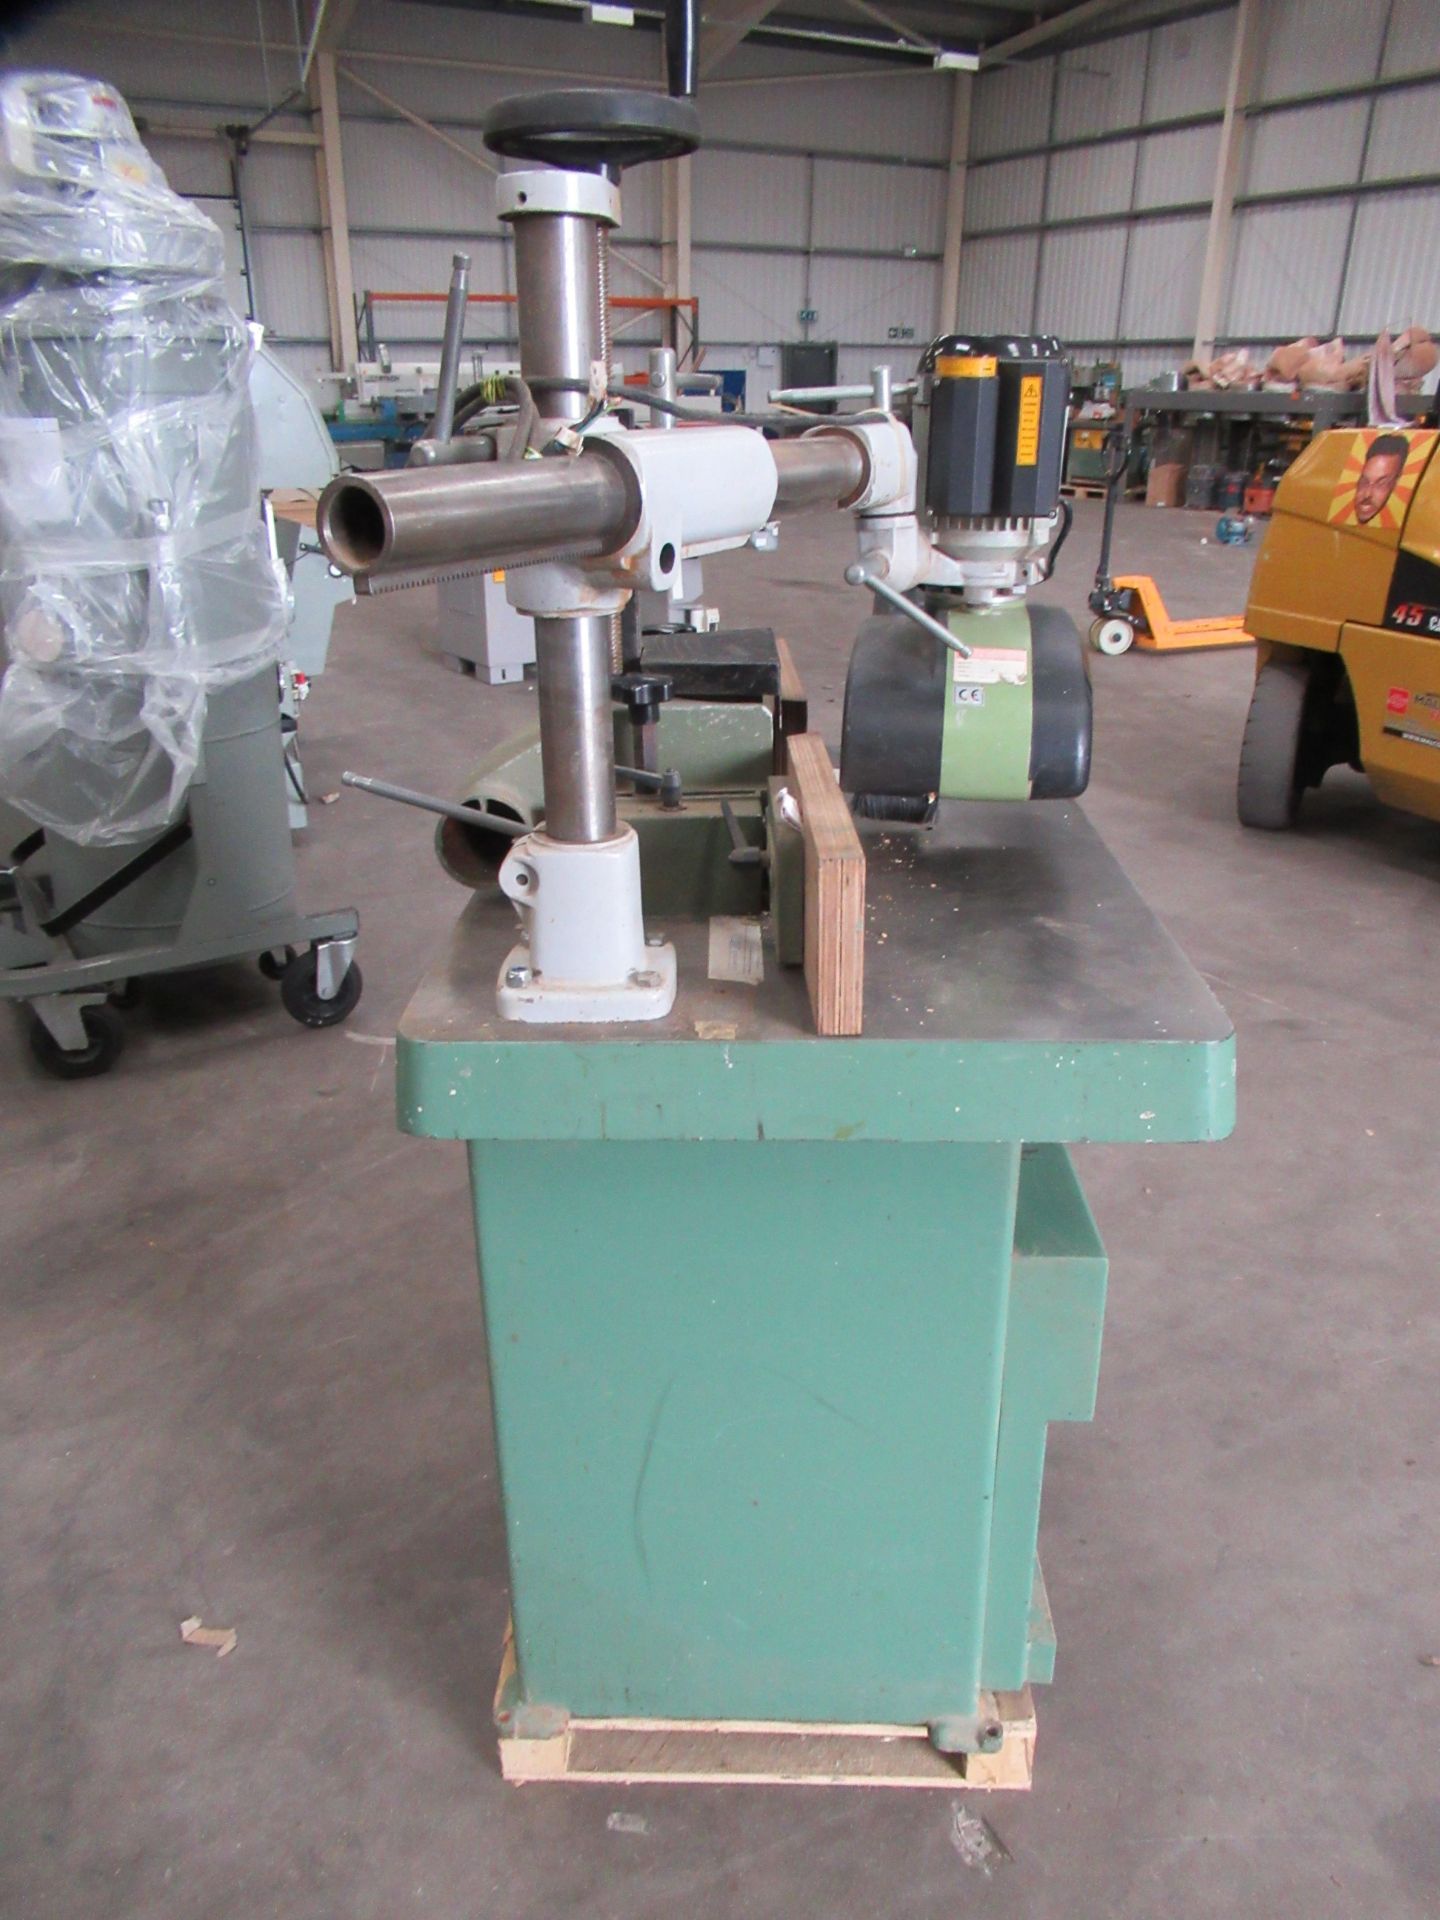 1 1/4" Spindle Moulder 4 Speed 4kW 415V with Powerd Roller Feed - Image 5 of 9